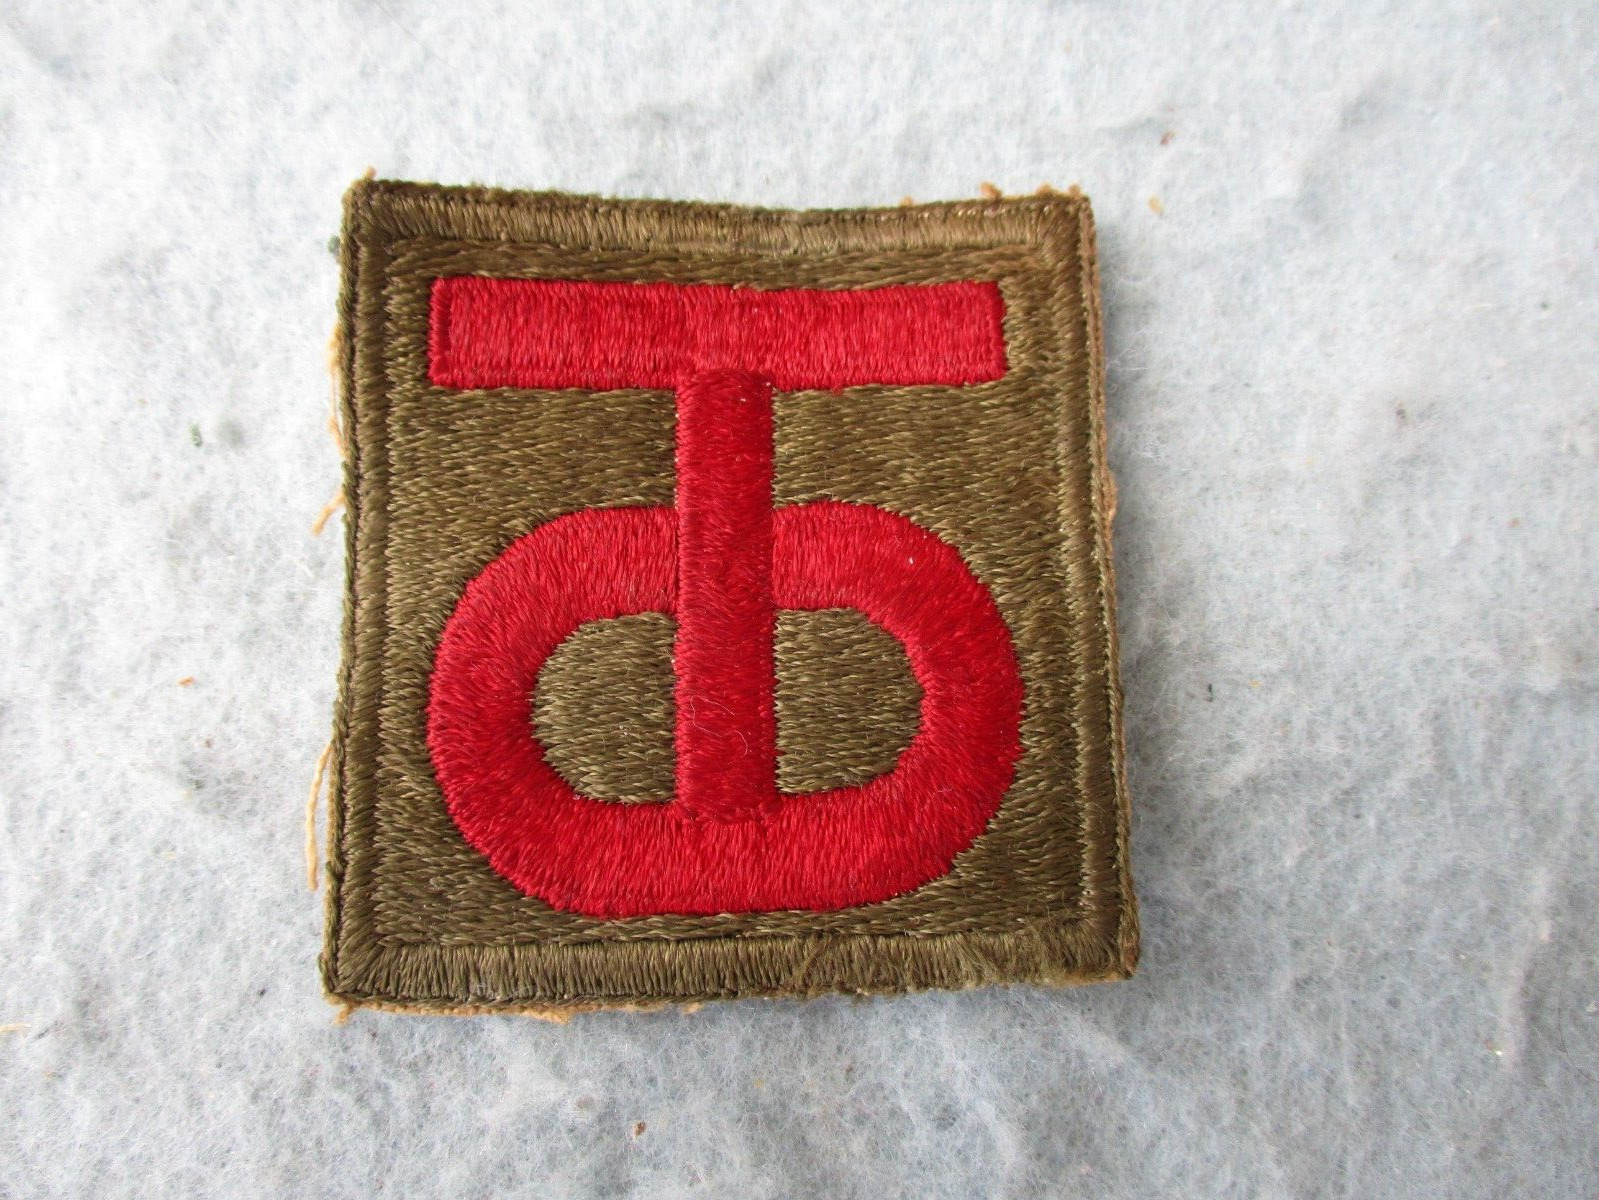 WWII US Army Patch 90th Division Tough Ombres Normandy European Theater WW2